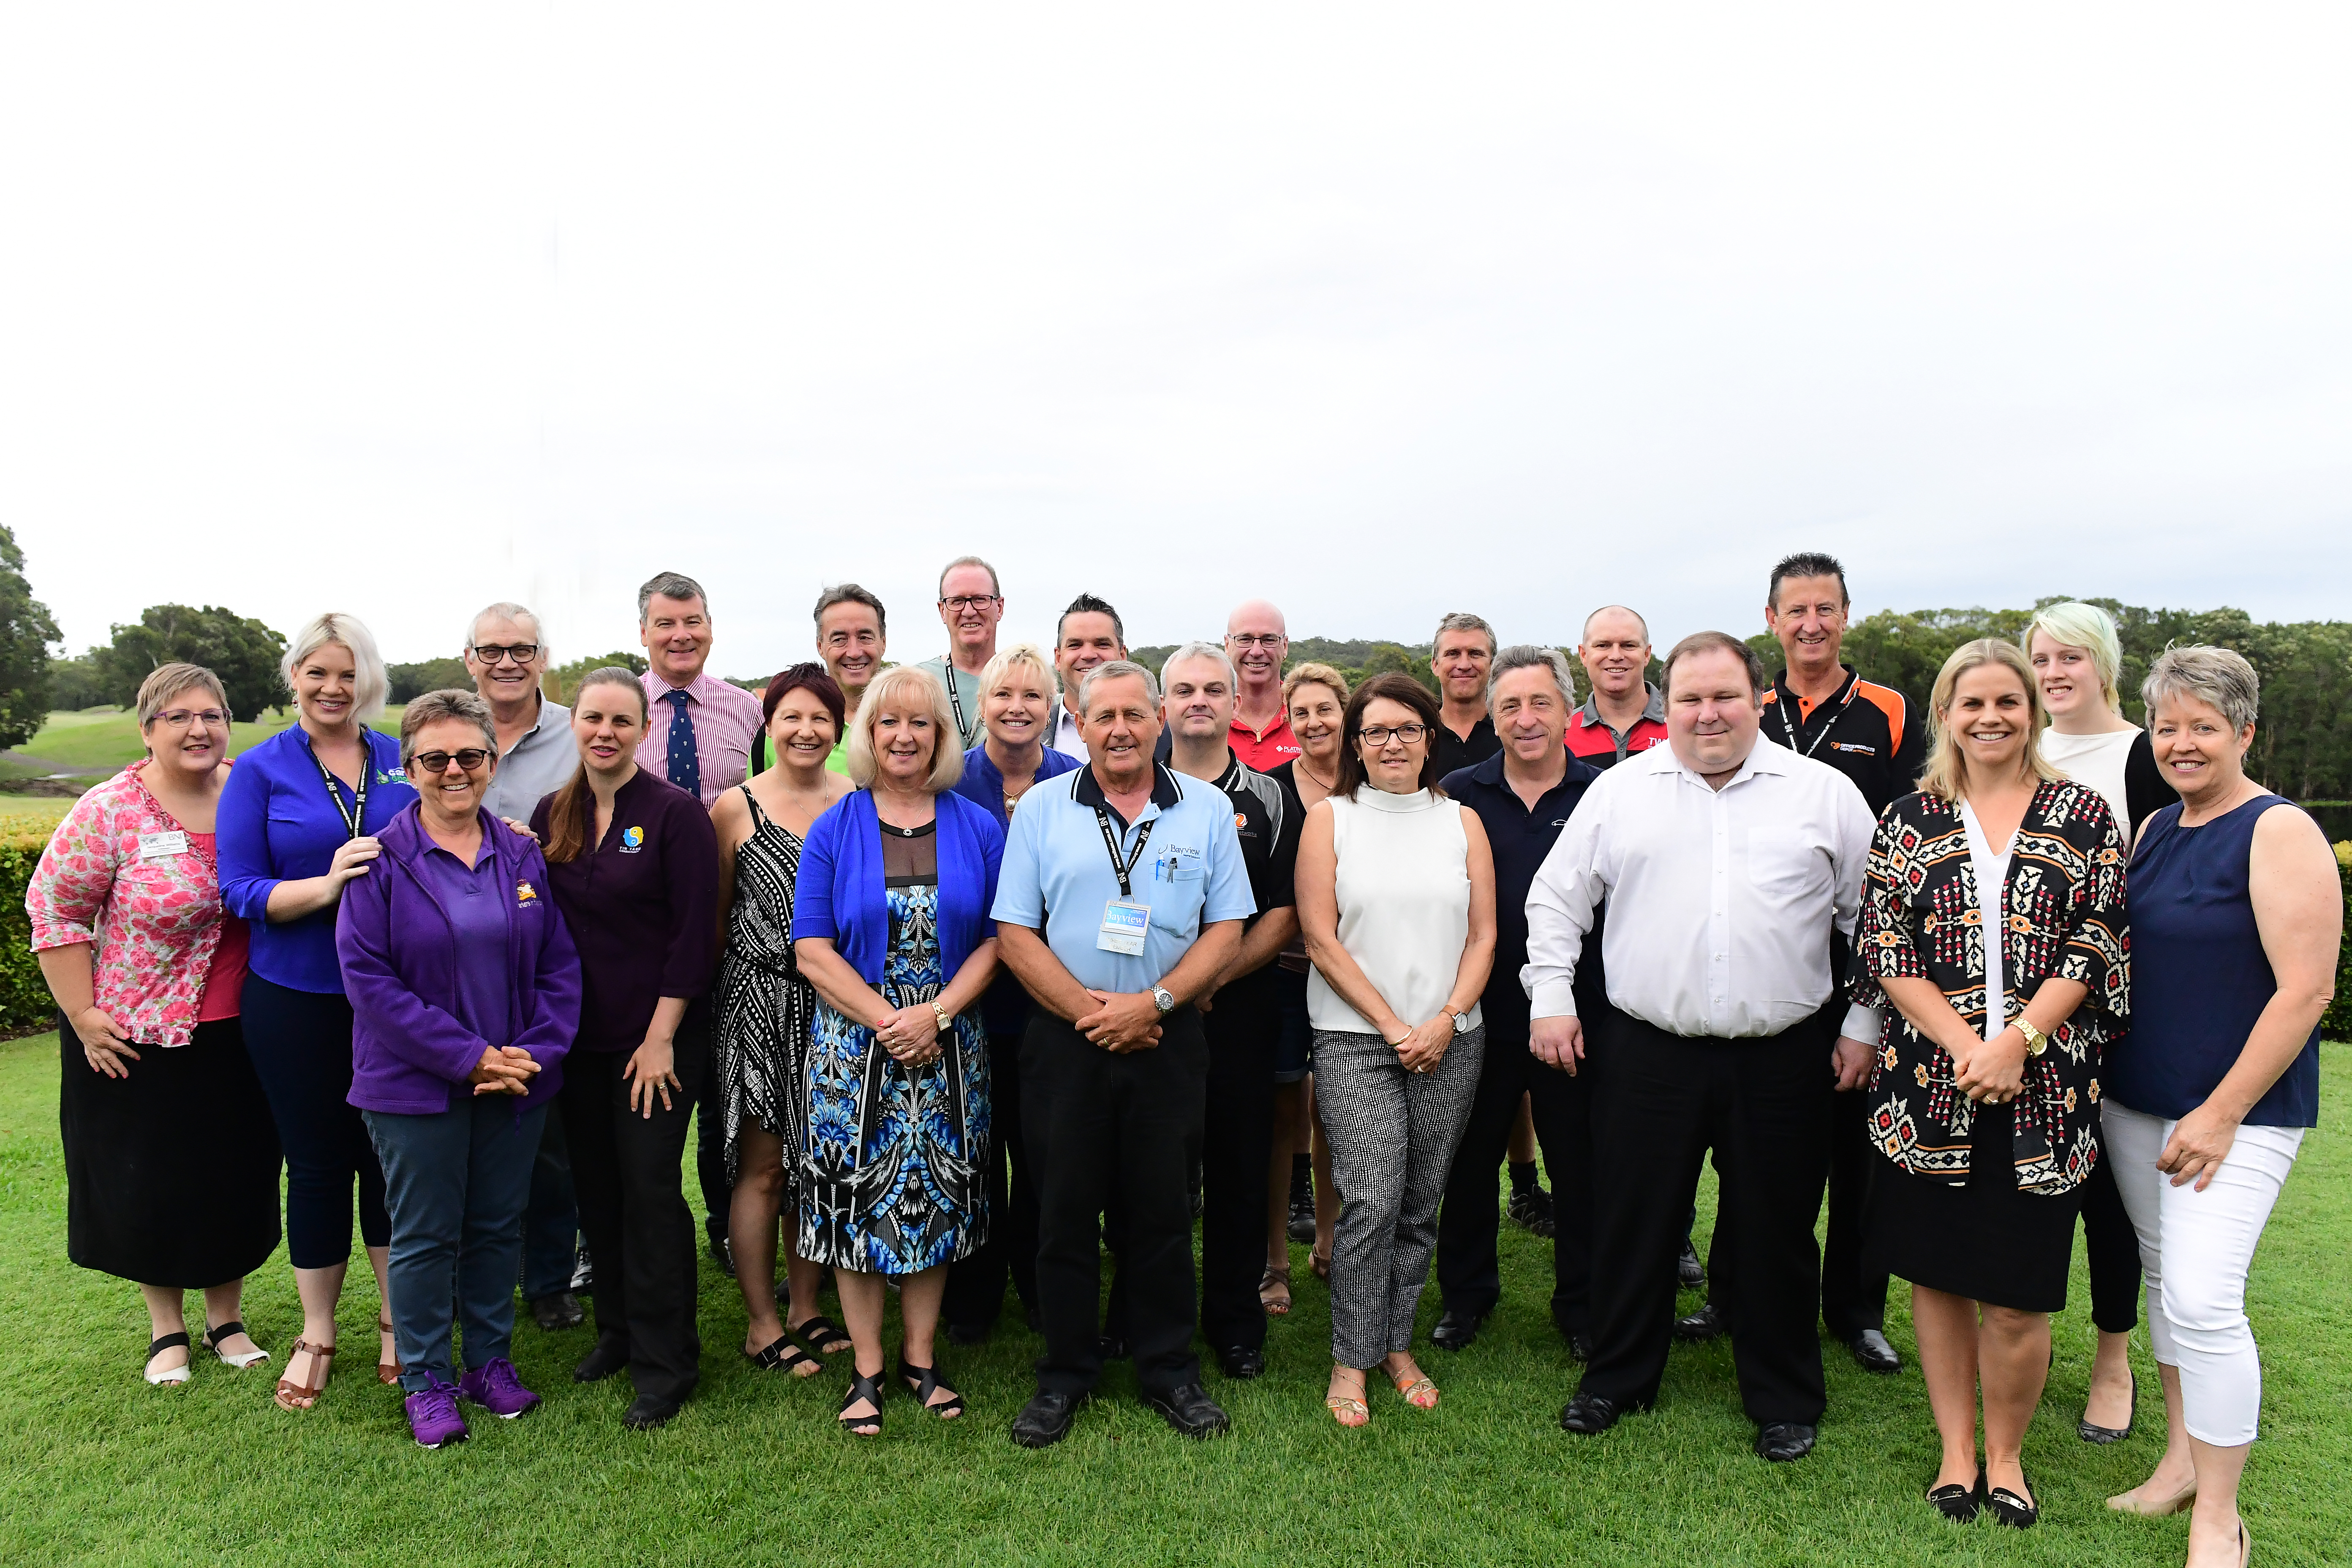 BNI HORIZONS Port Stephens business owners gather on the lawn after Tuesday's breakfast. Photo by Geoff Clark at Capture Imaging